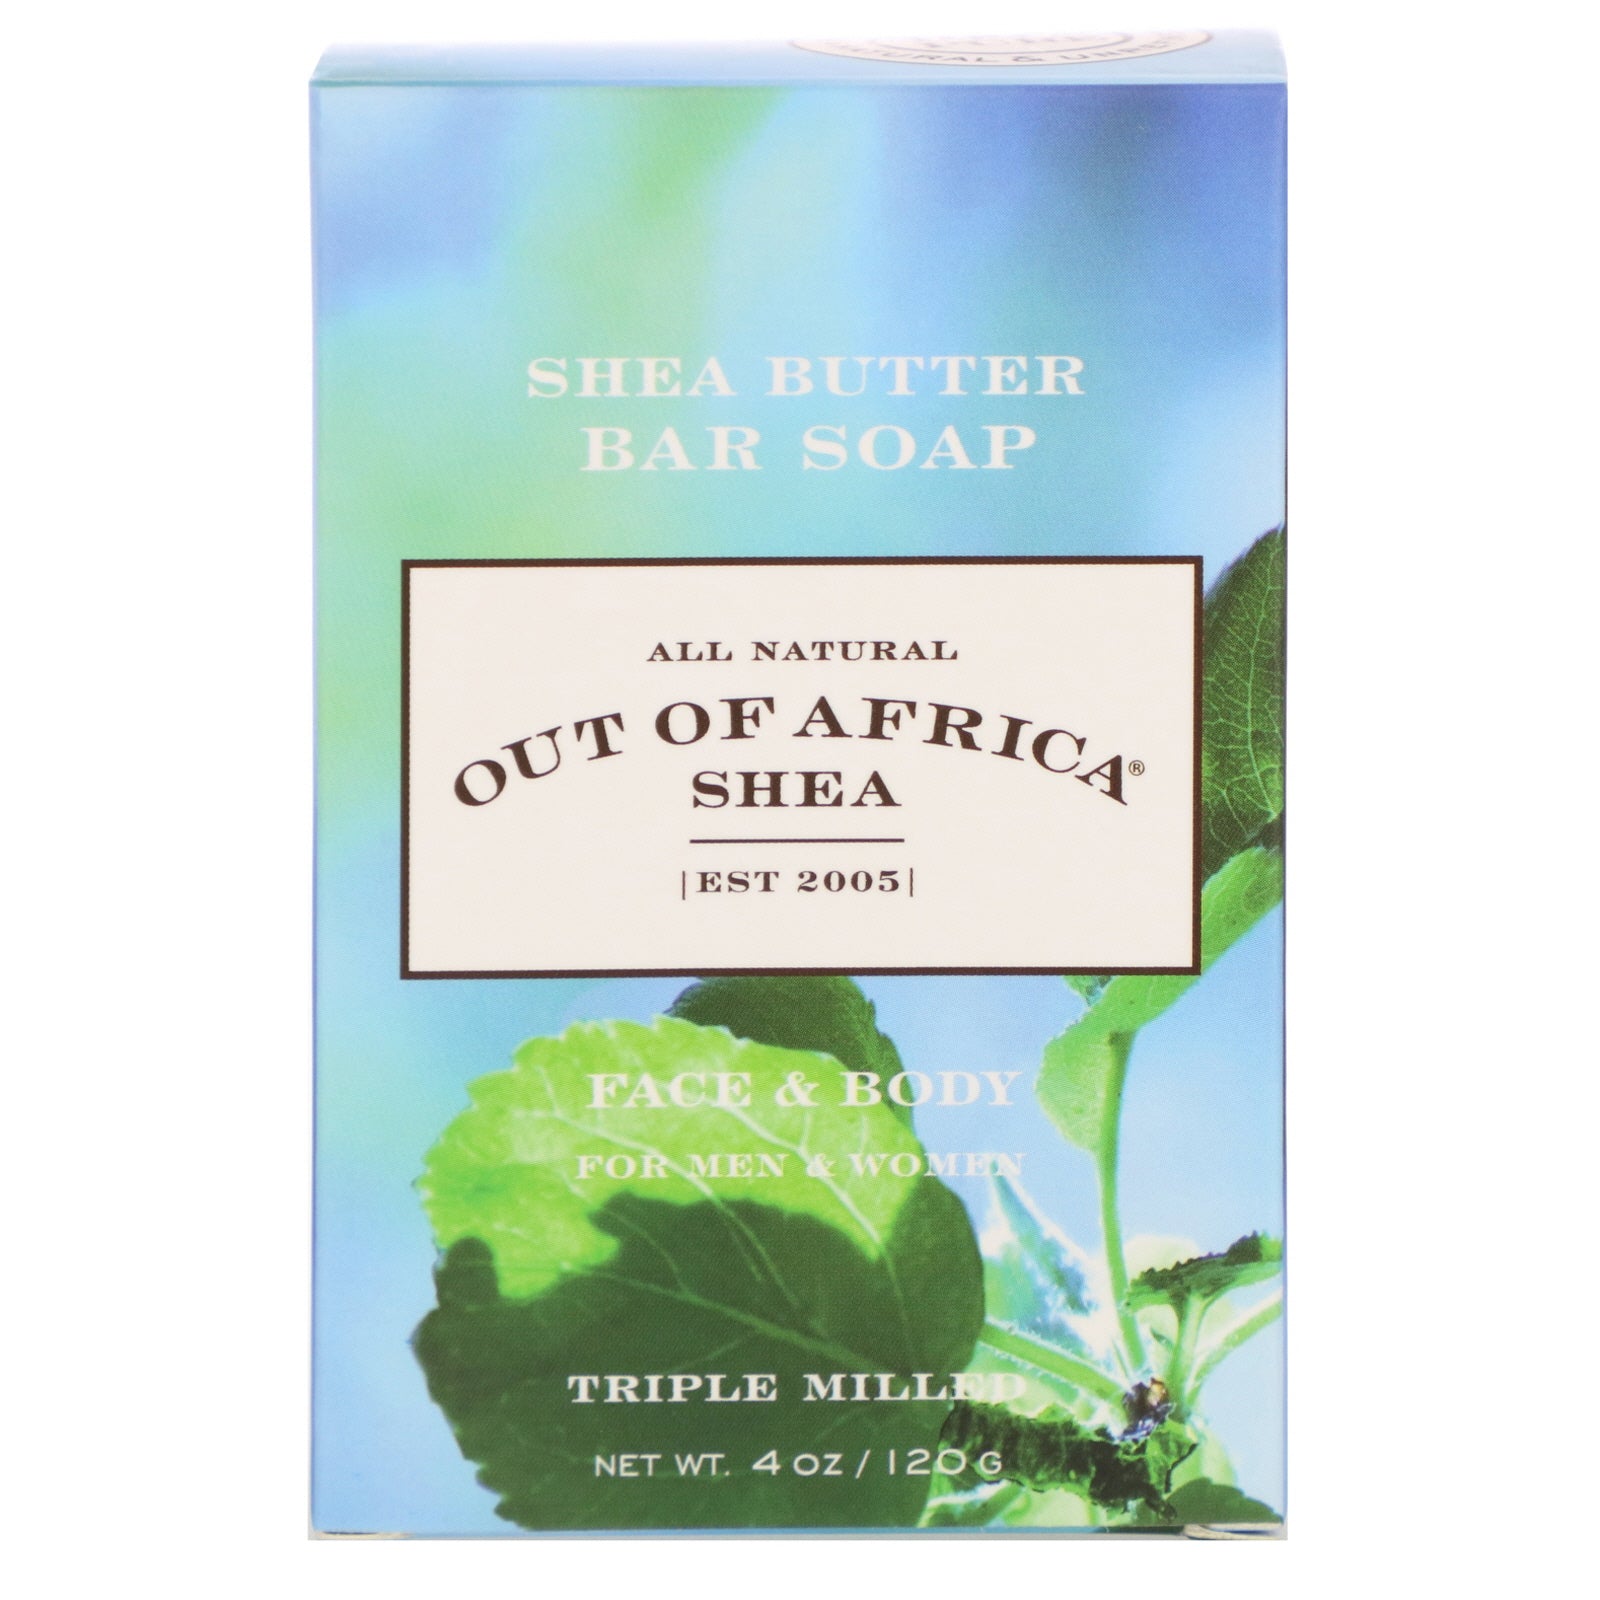 Out of Africa, Shea Butter Bar Soap, Face & Body, 4 oz (120 g)